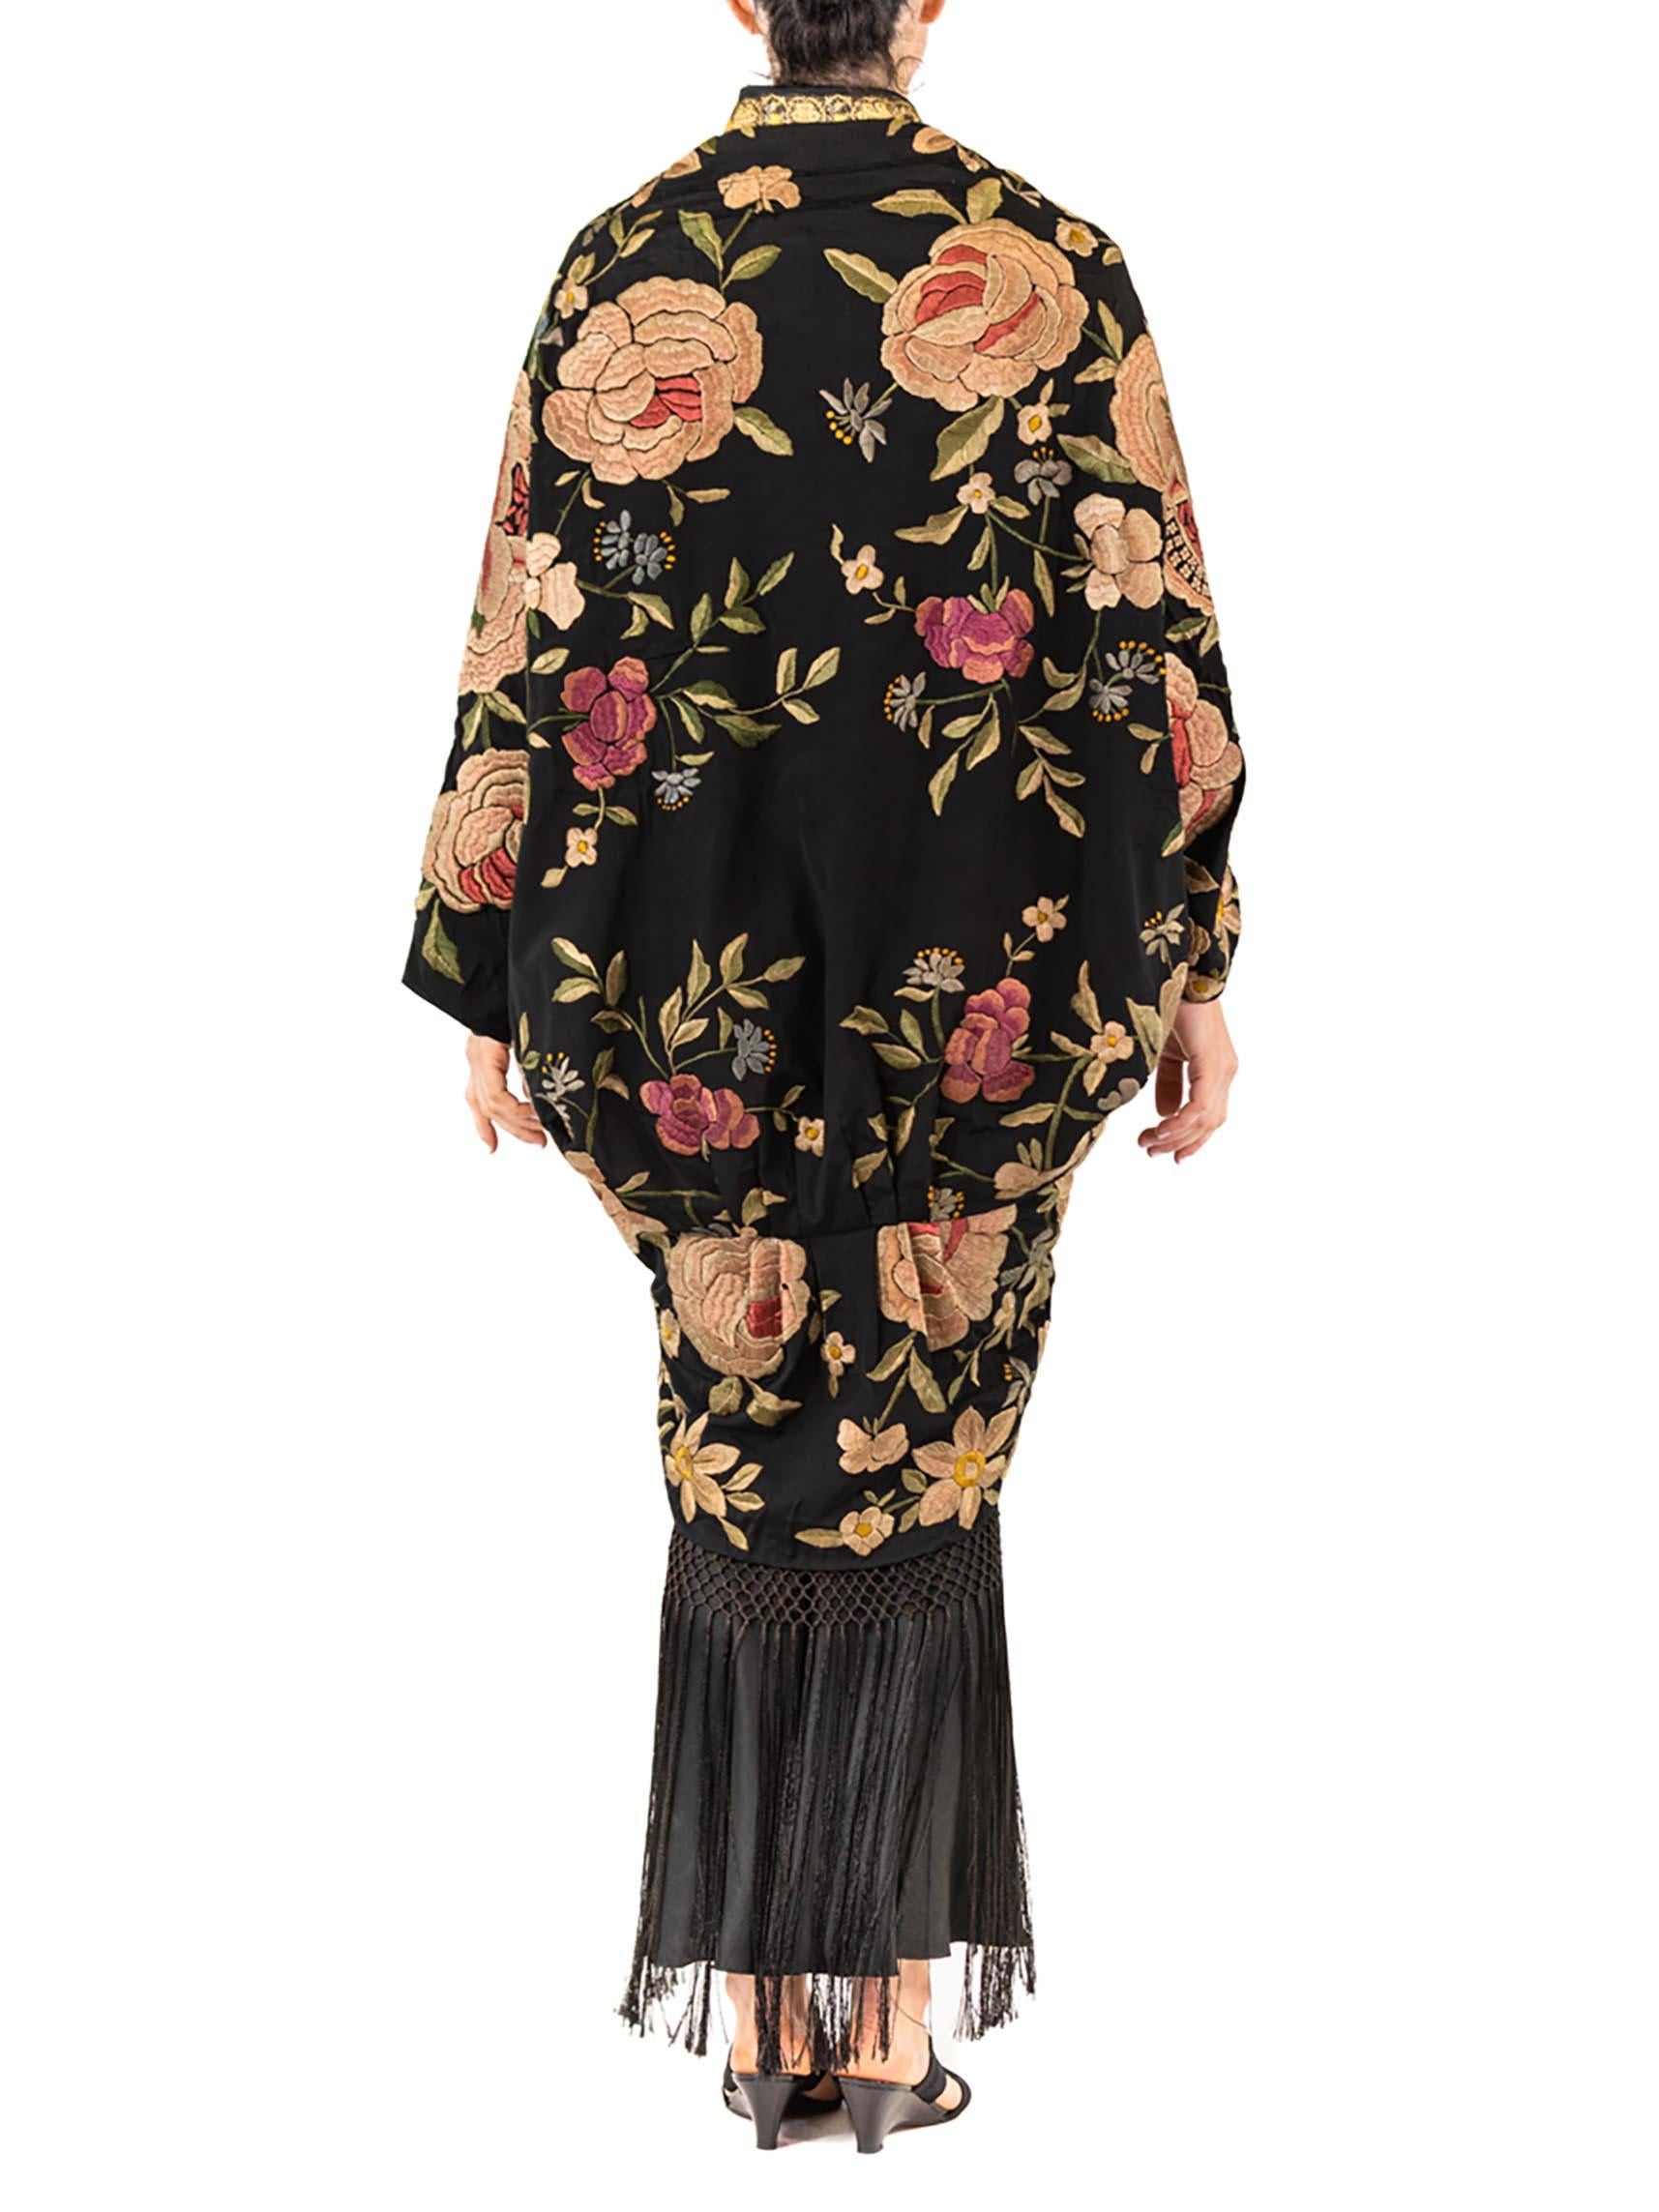 MORPHEW ATELIER Black Hand Embroidered Silk Floral Cocoon With Fringe And Vinta For Sale 4